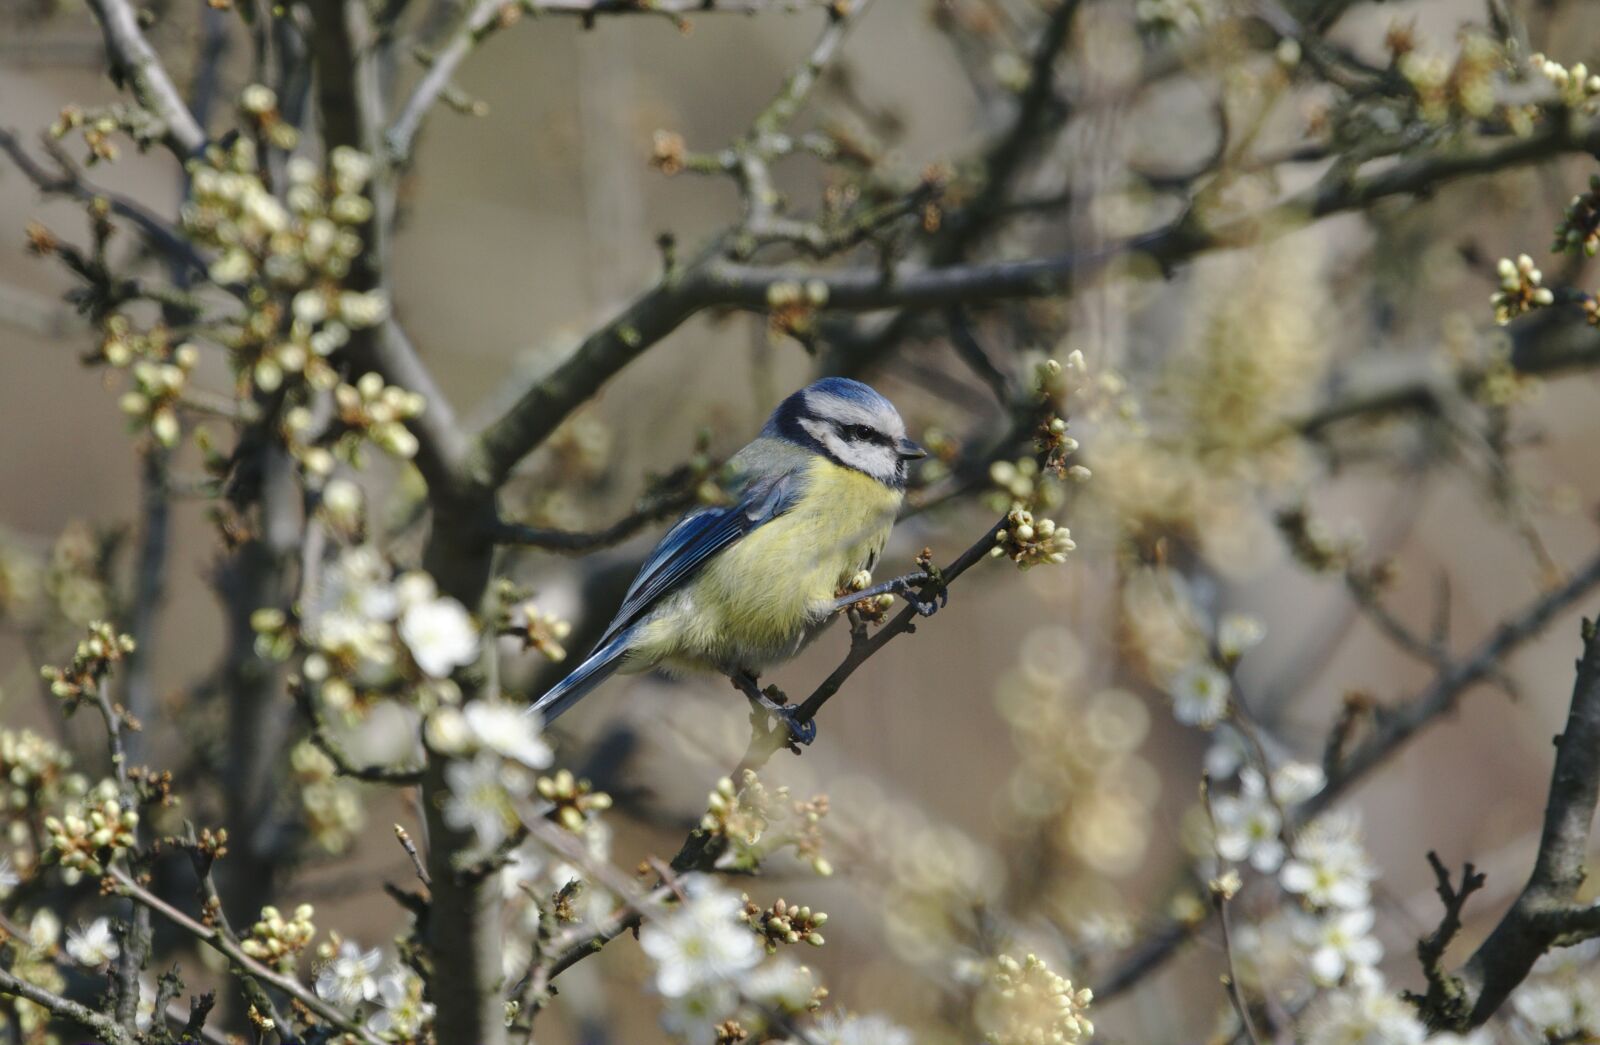 Sony a6000 sample photo. Blue tit, spring, animal photography